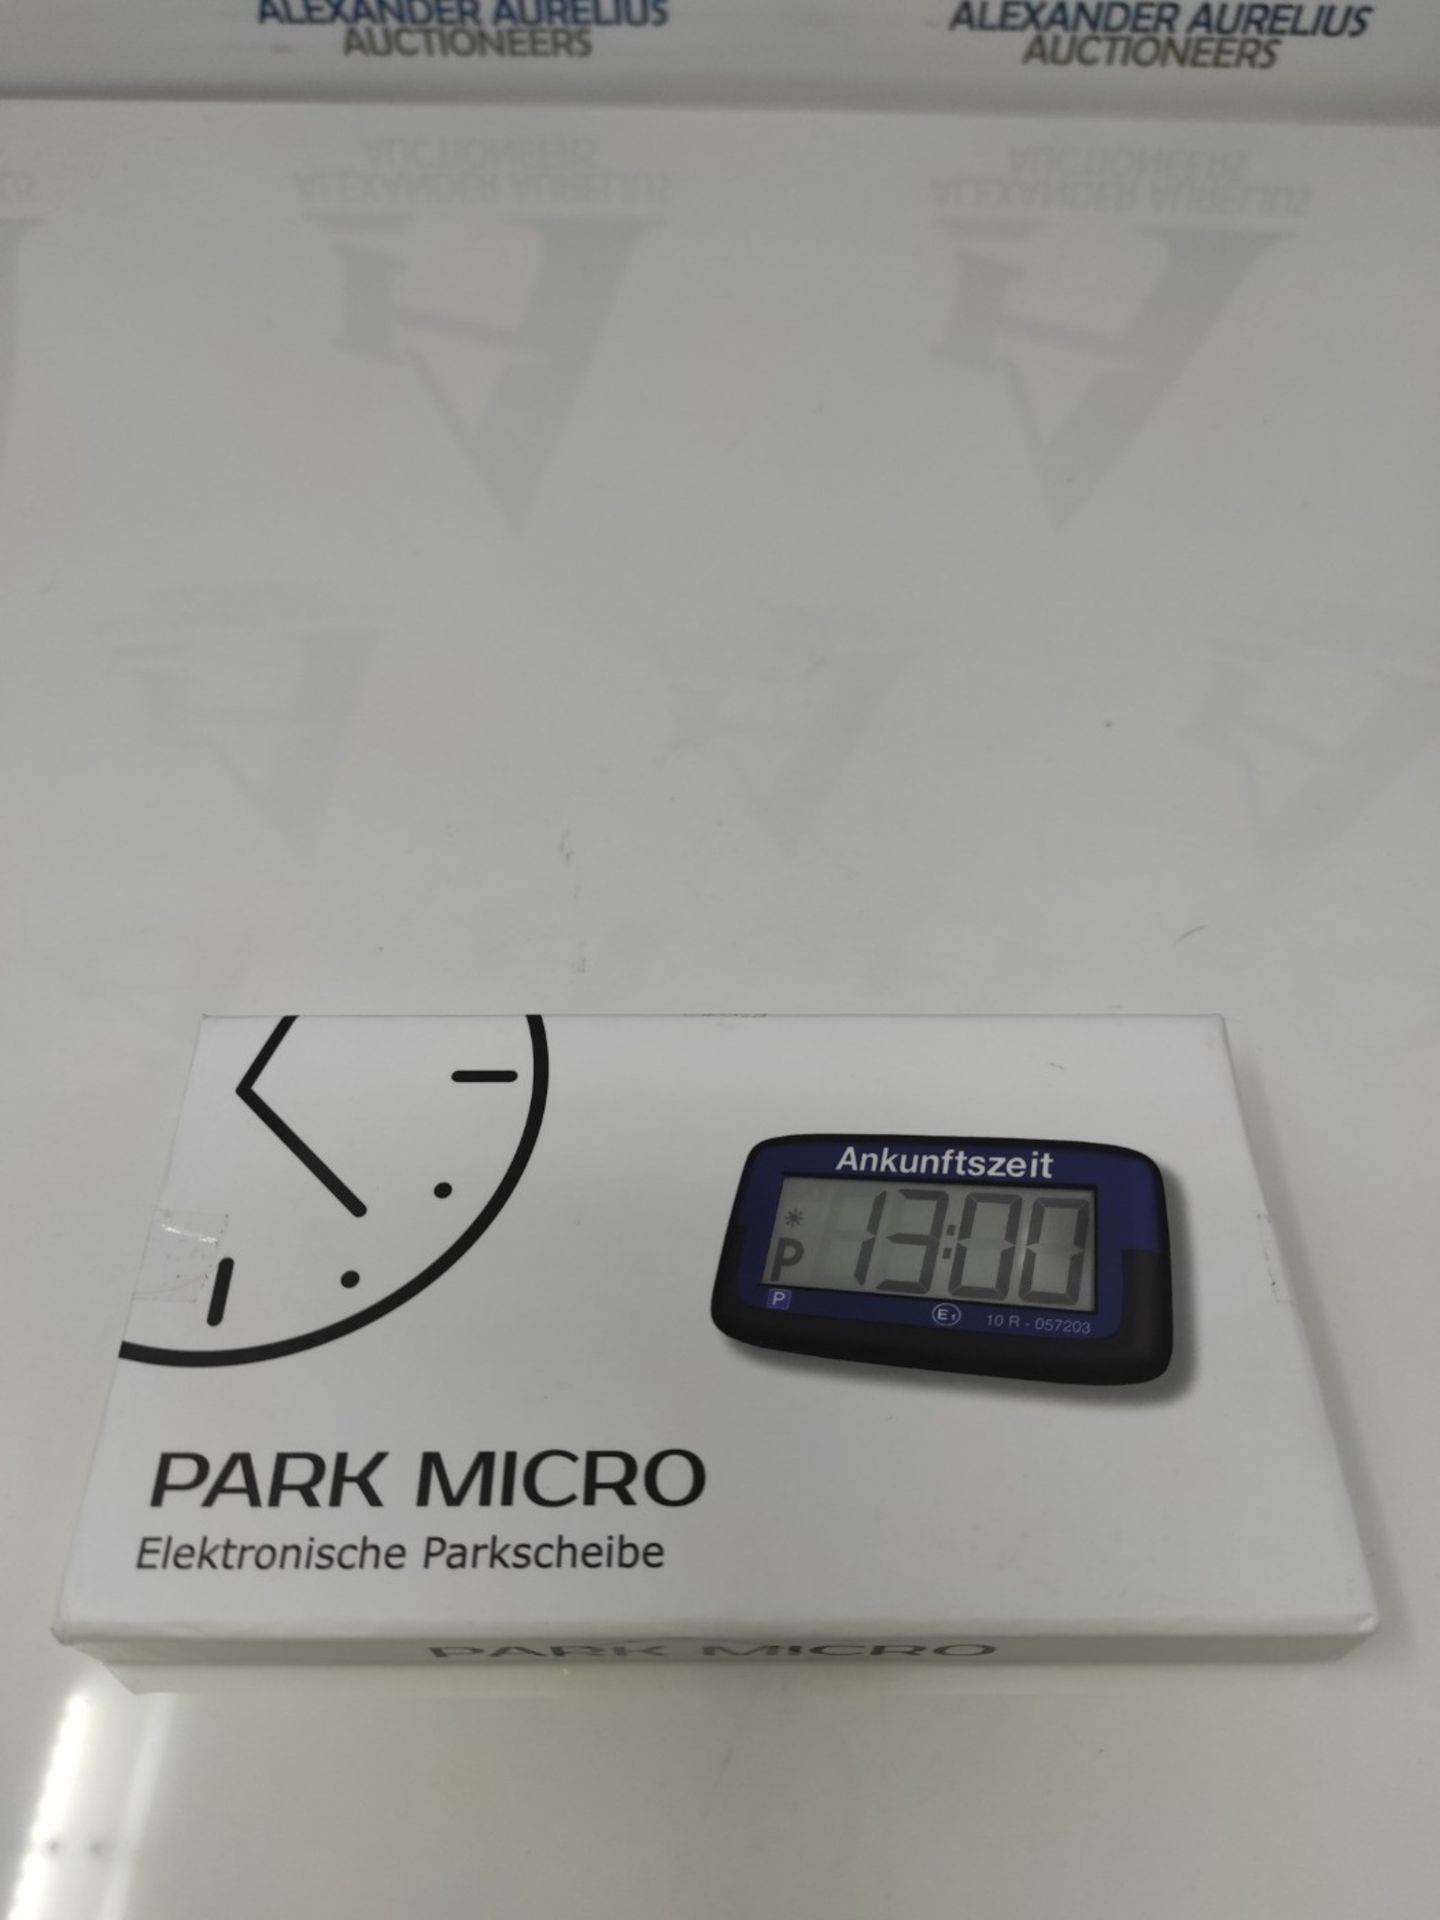 Needit Park Micro electronic parking disc with approval I Digital parking clock Micro - Bild 2 aus 3